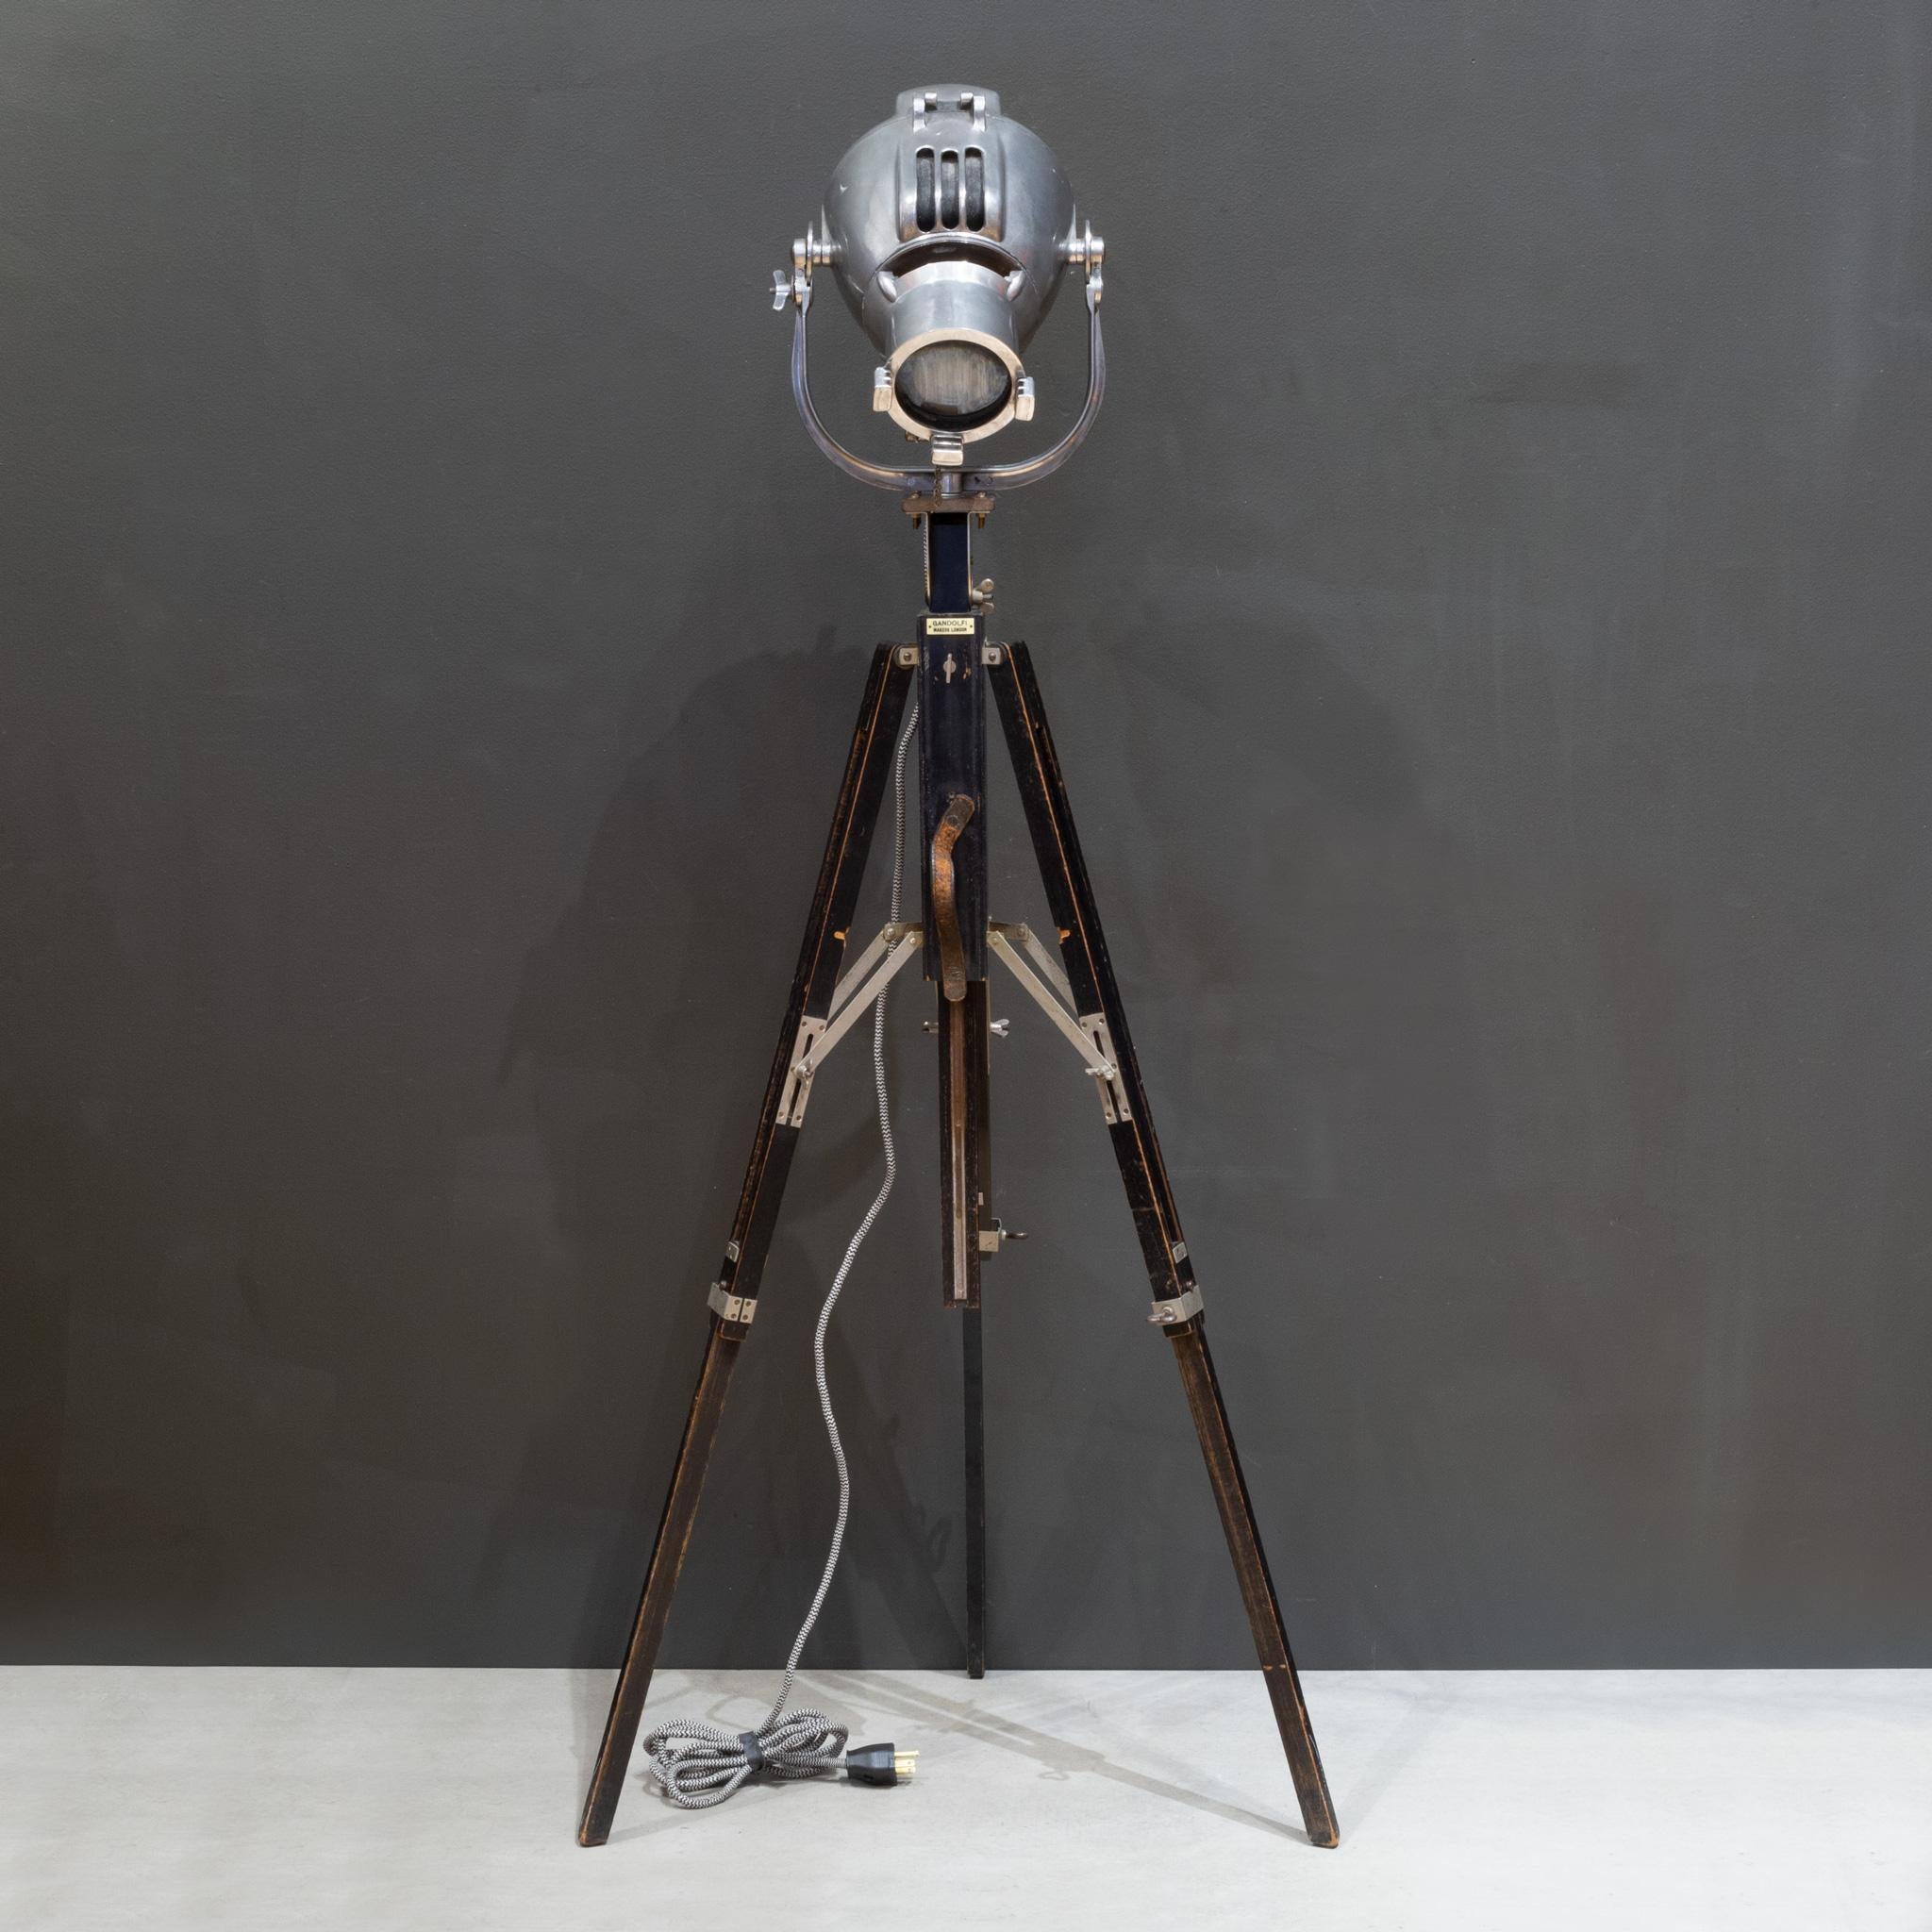 Adjustable Industrial Stage Light Table Lamp/Floor Lamp C.1900-1950 In Good Condition For Sale In San Francisco, CA